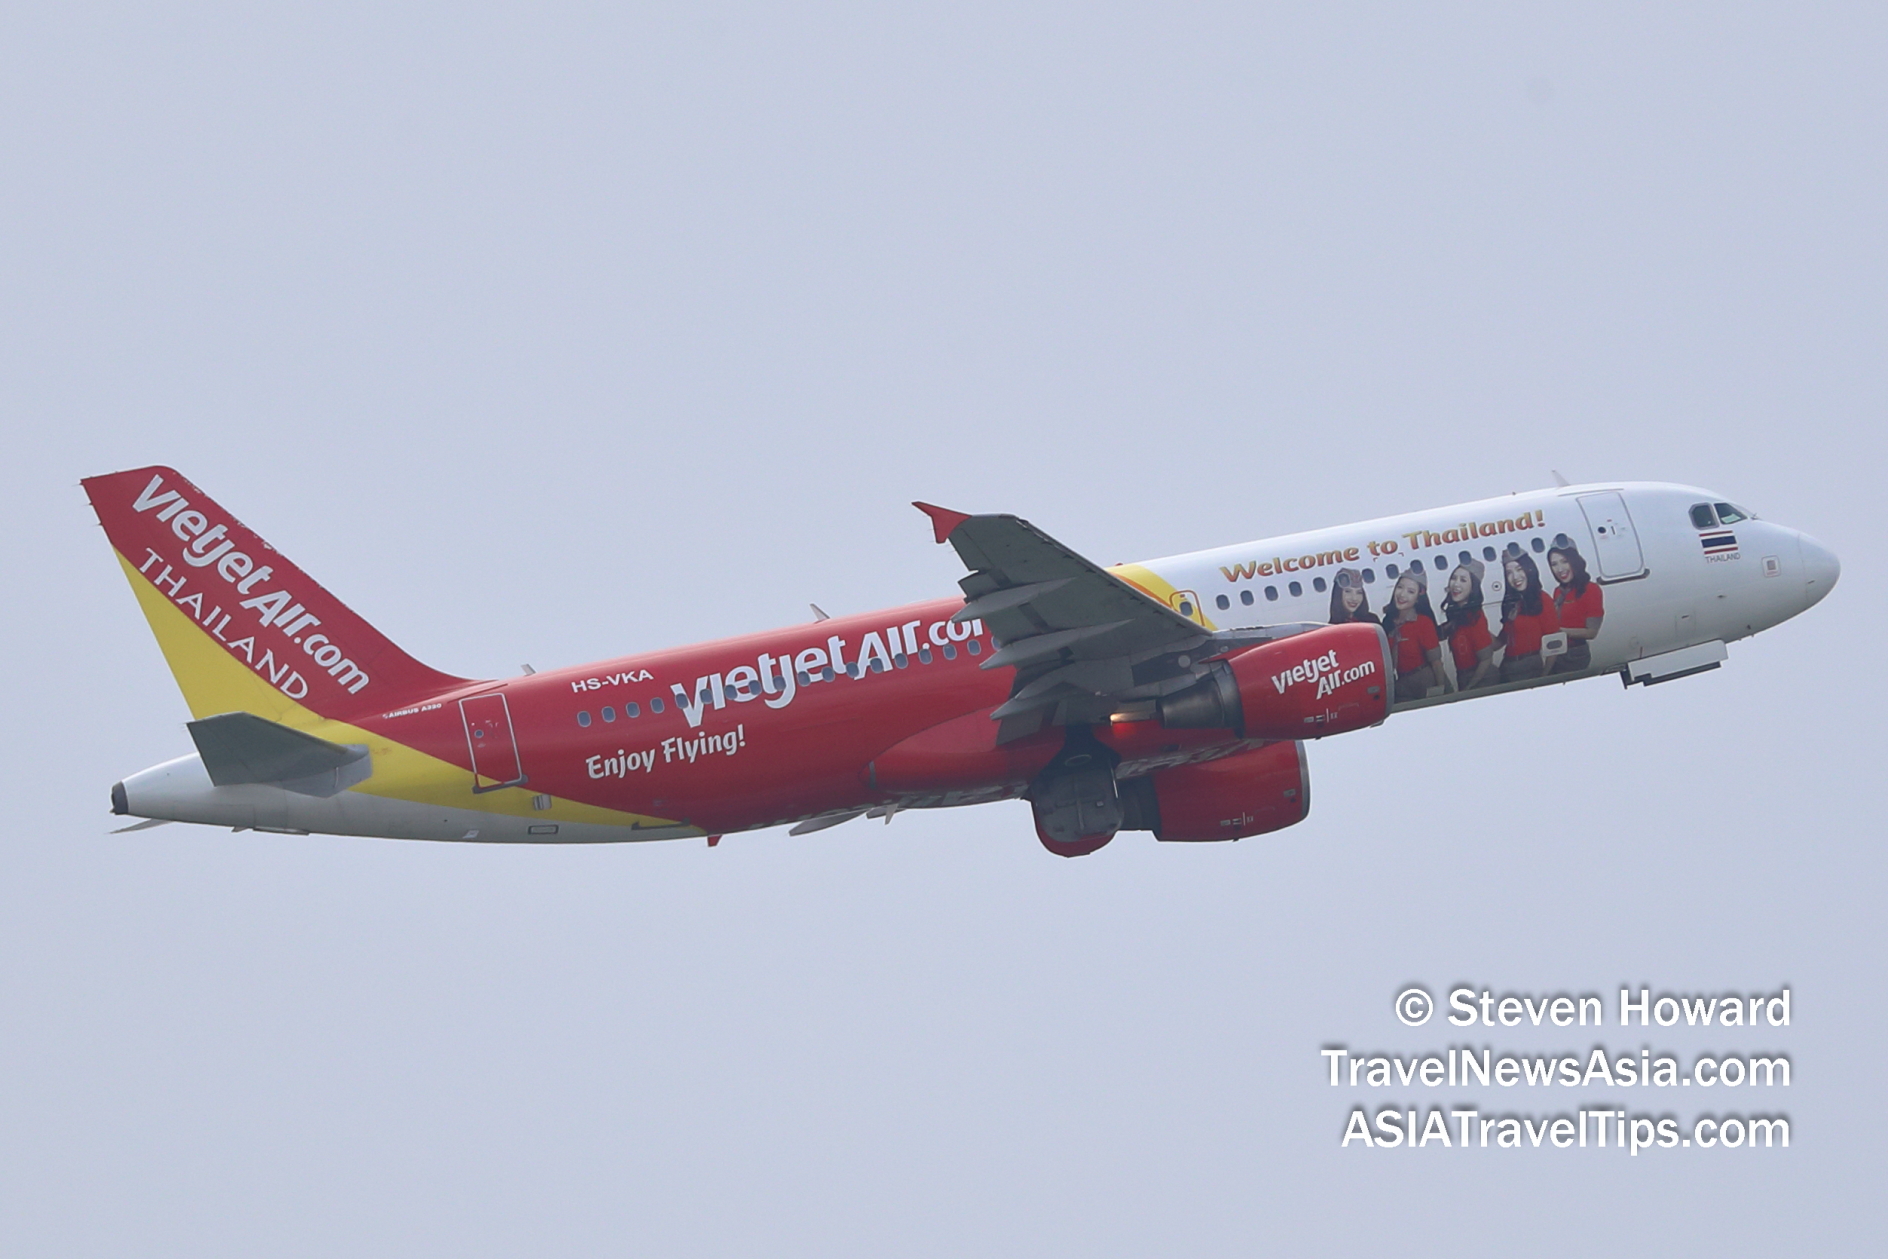 Thai Vietjet Airbus A320 reg: HS-VKA. Picture by Steven Howard of TravelNewsAsia.com Click to enlarge.